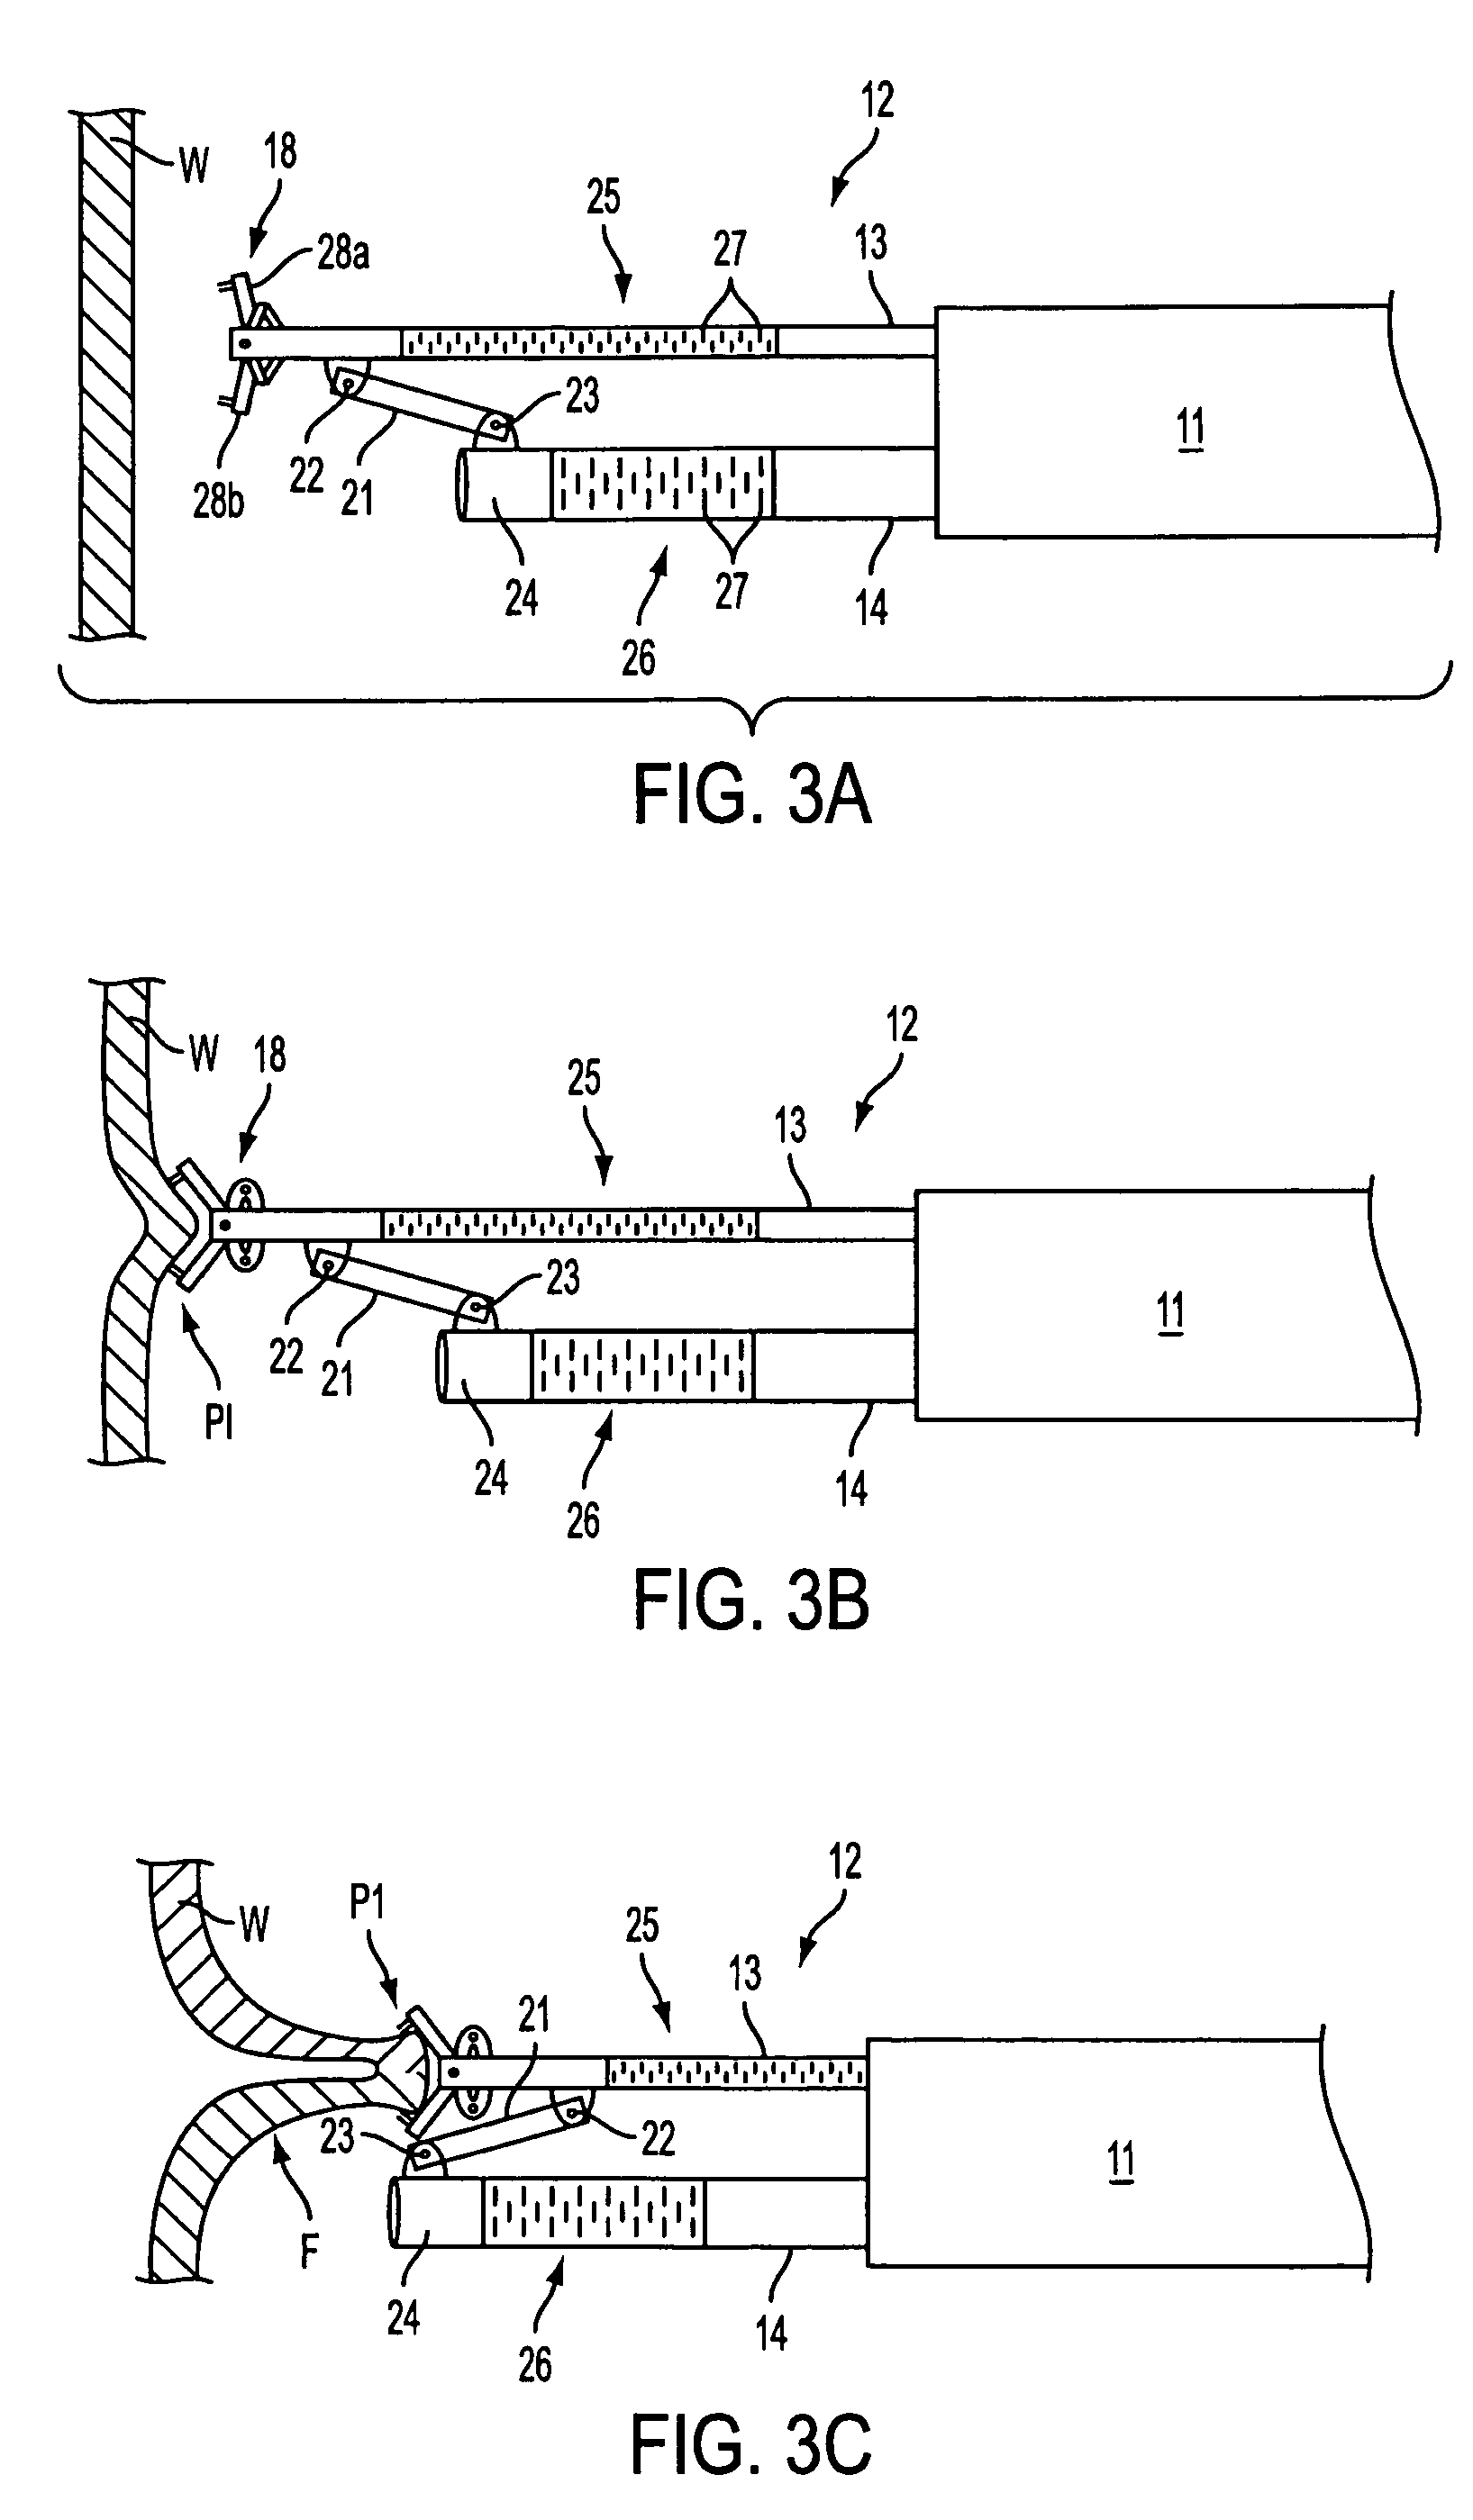 Apparatus and methods for forming gastrointestinal tissue approximations